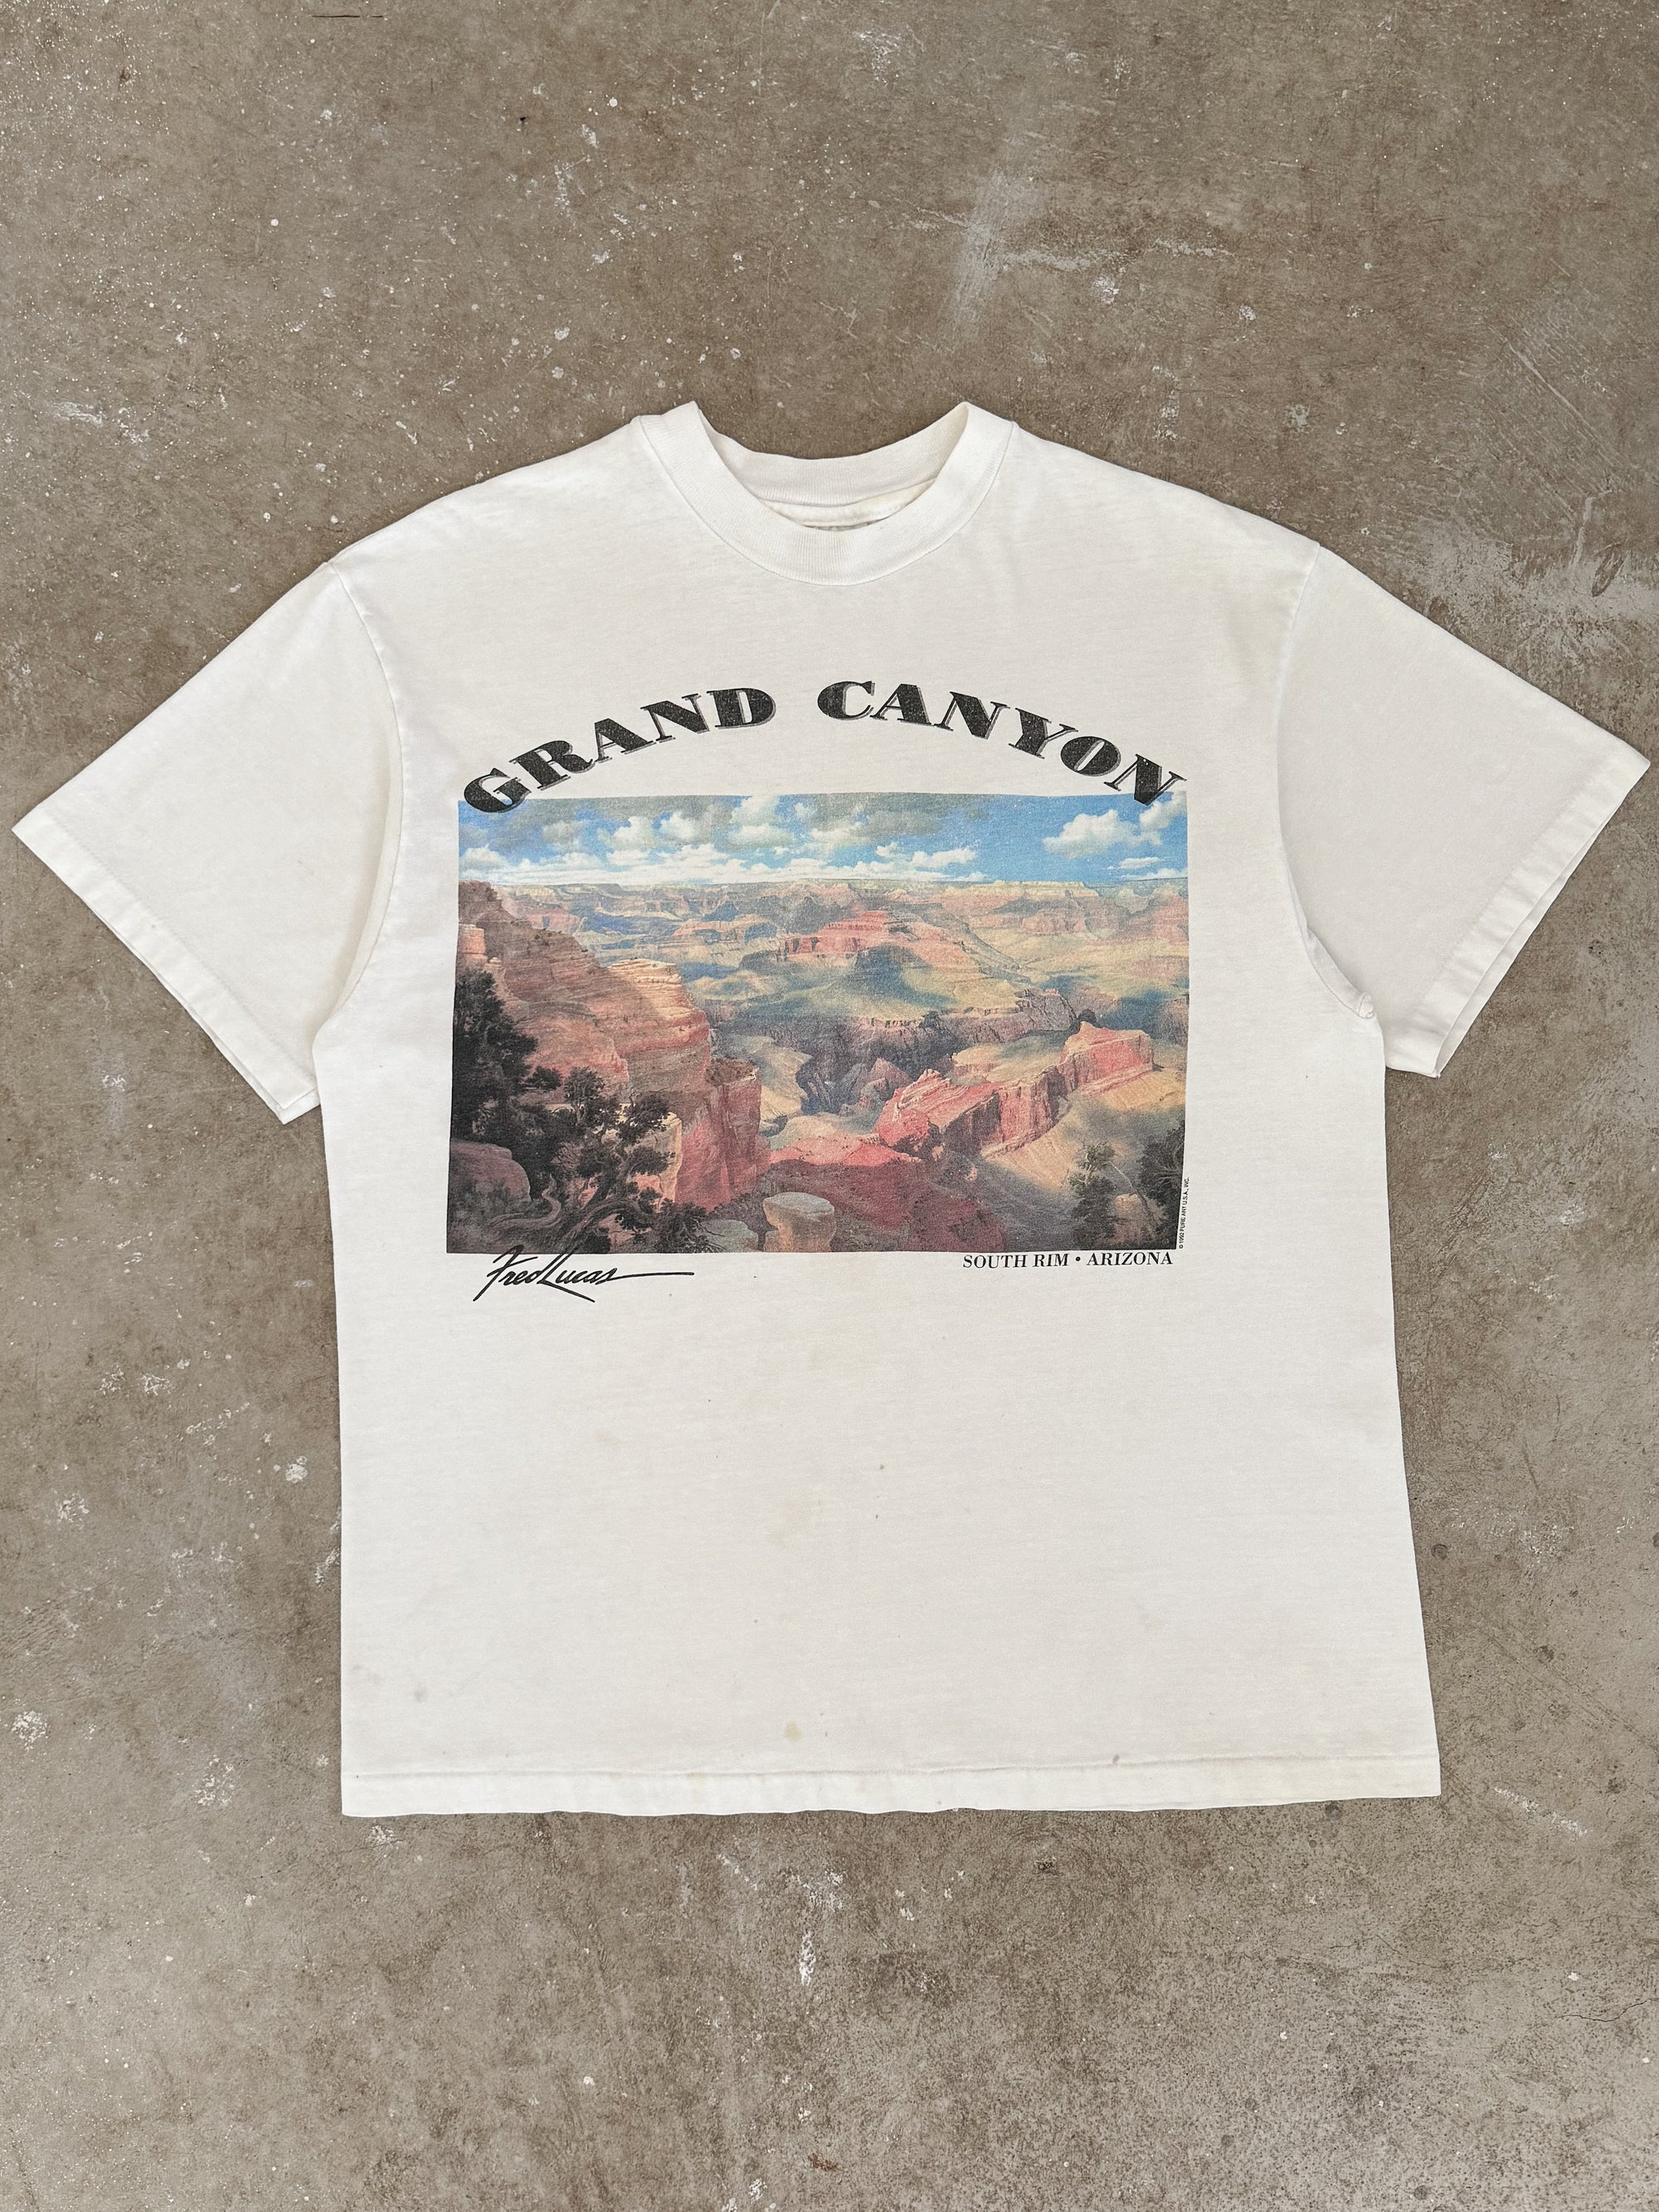 1990s "Grand Canyon" Tee (M/L)